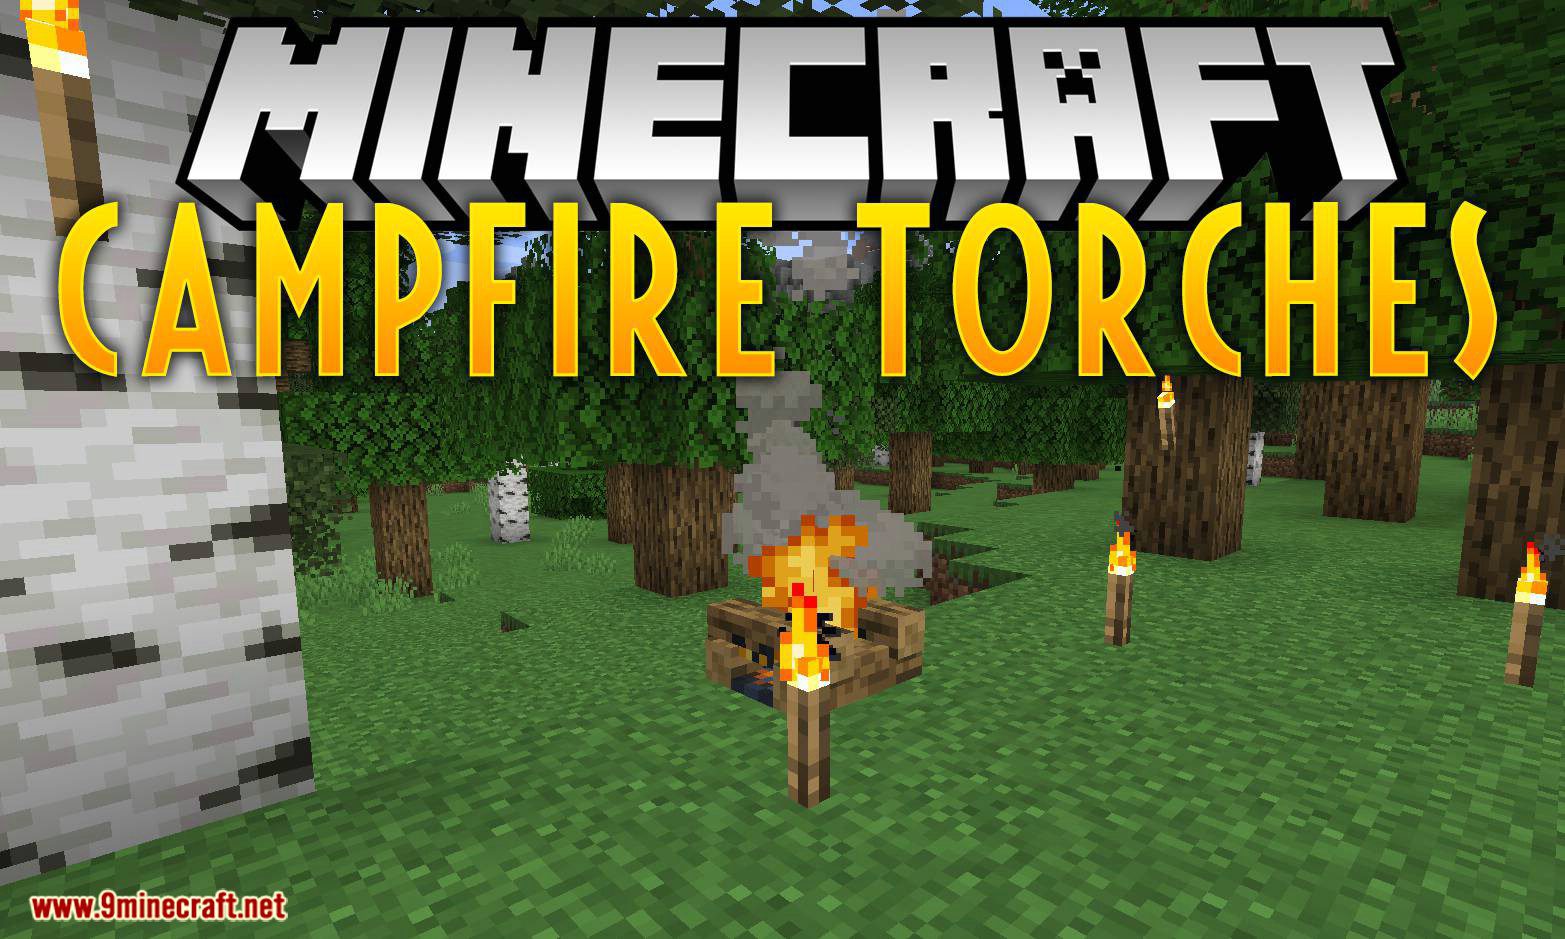 Campfire Torches mod for minecraft logo